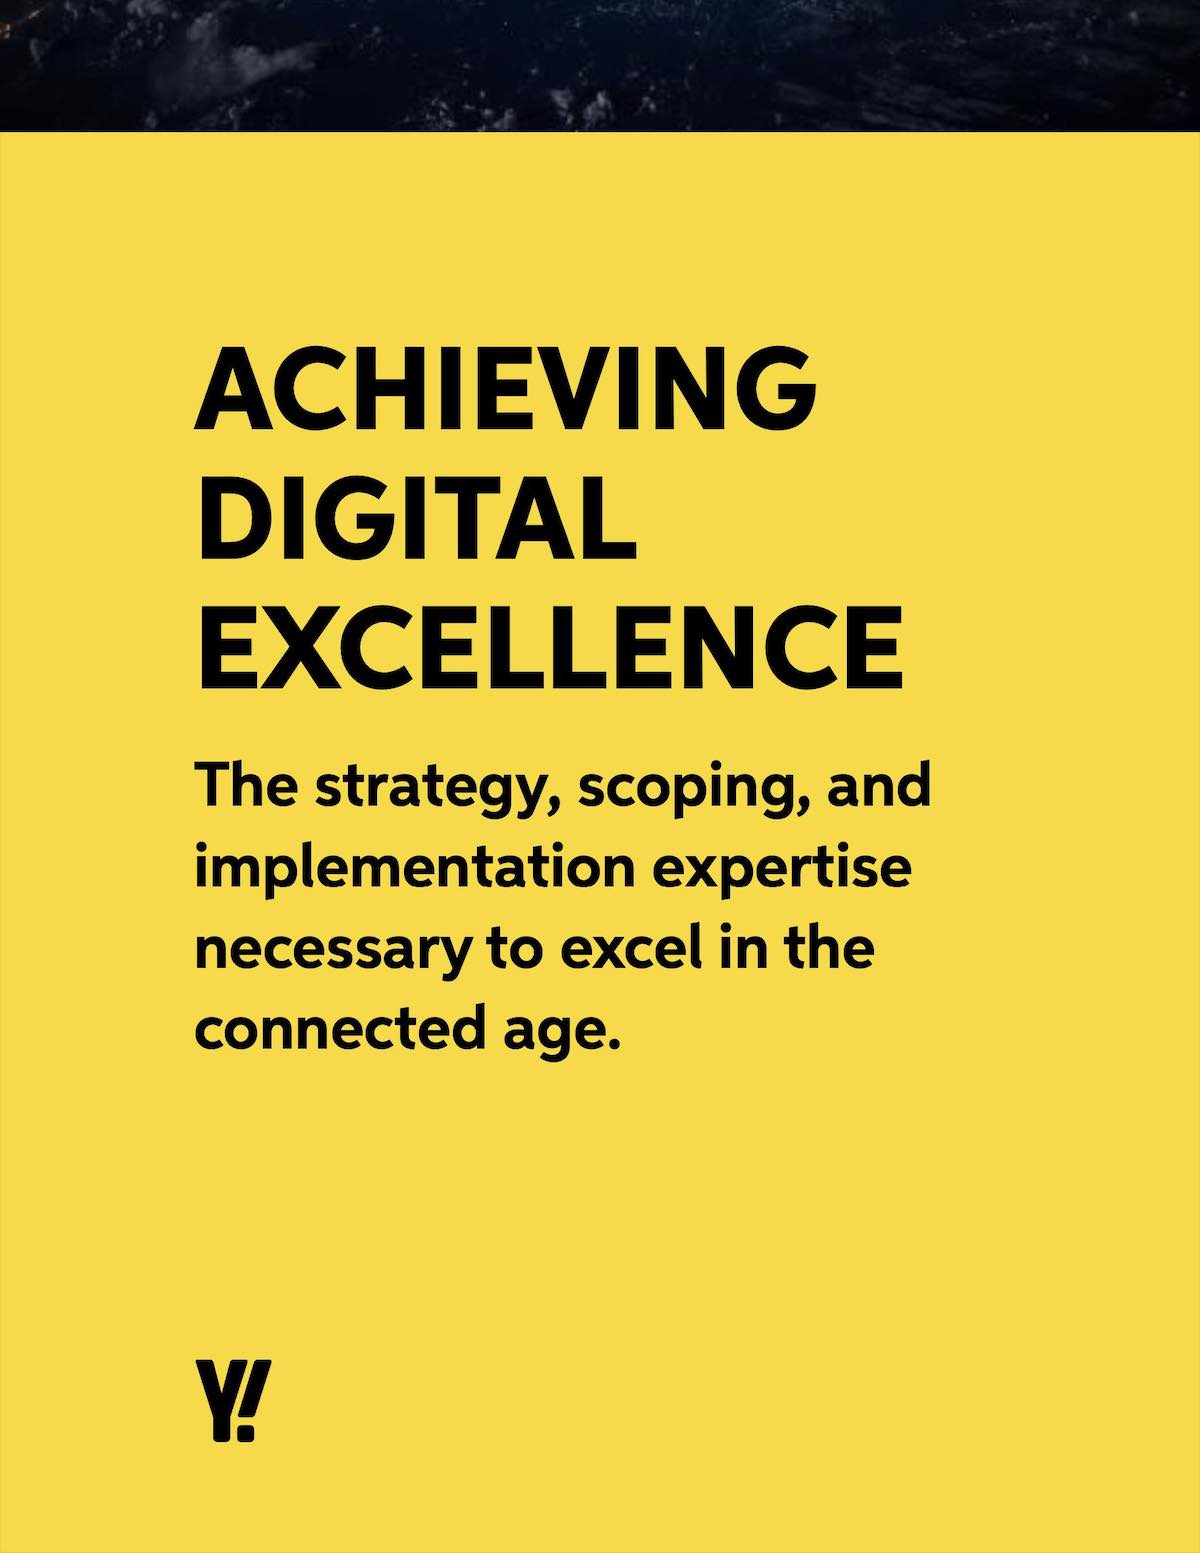 Achieving digital excellence book cover. Introducing the strategy, scoping, and implementation expertise necessary to excel in the connected age.